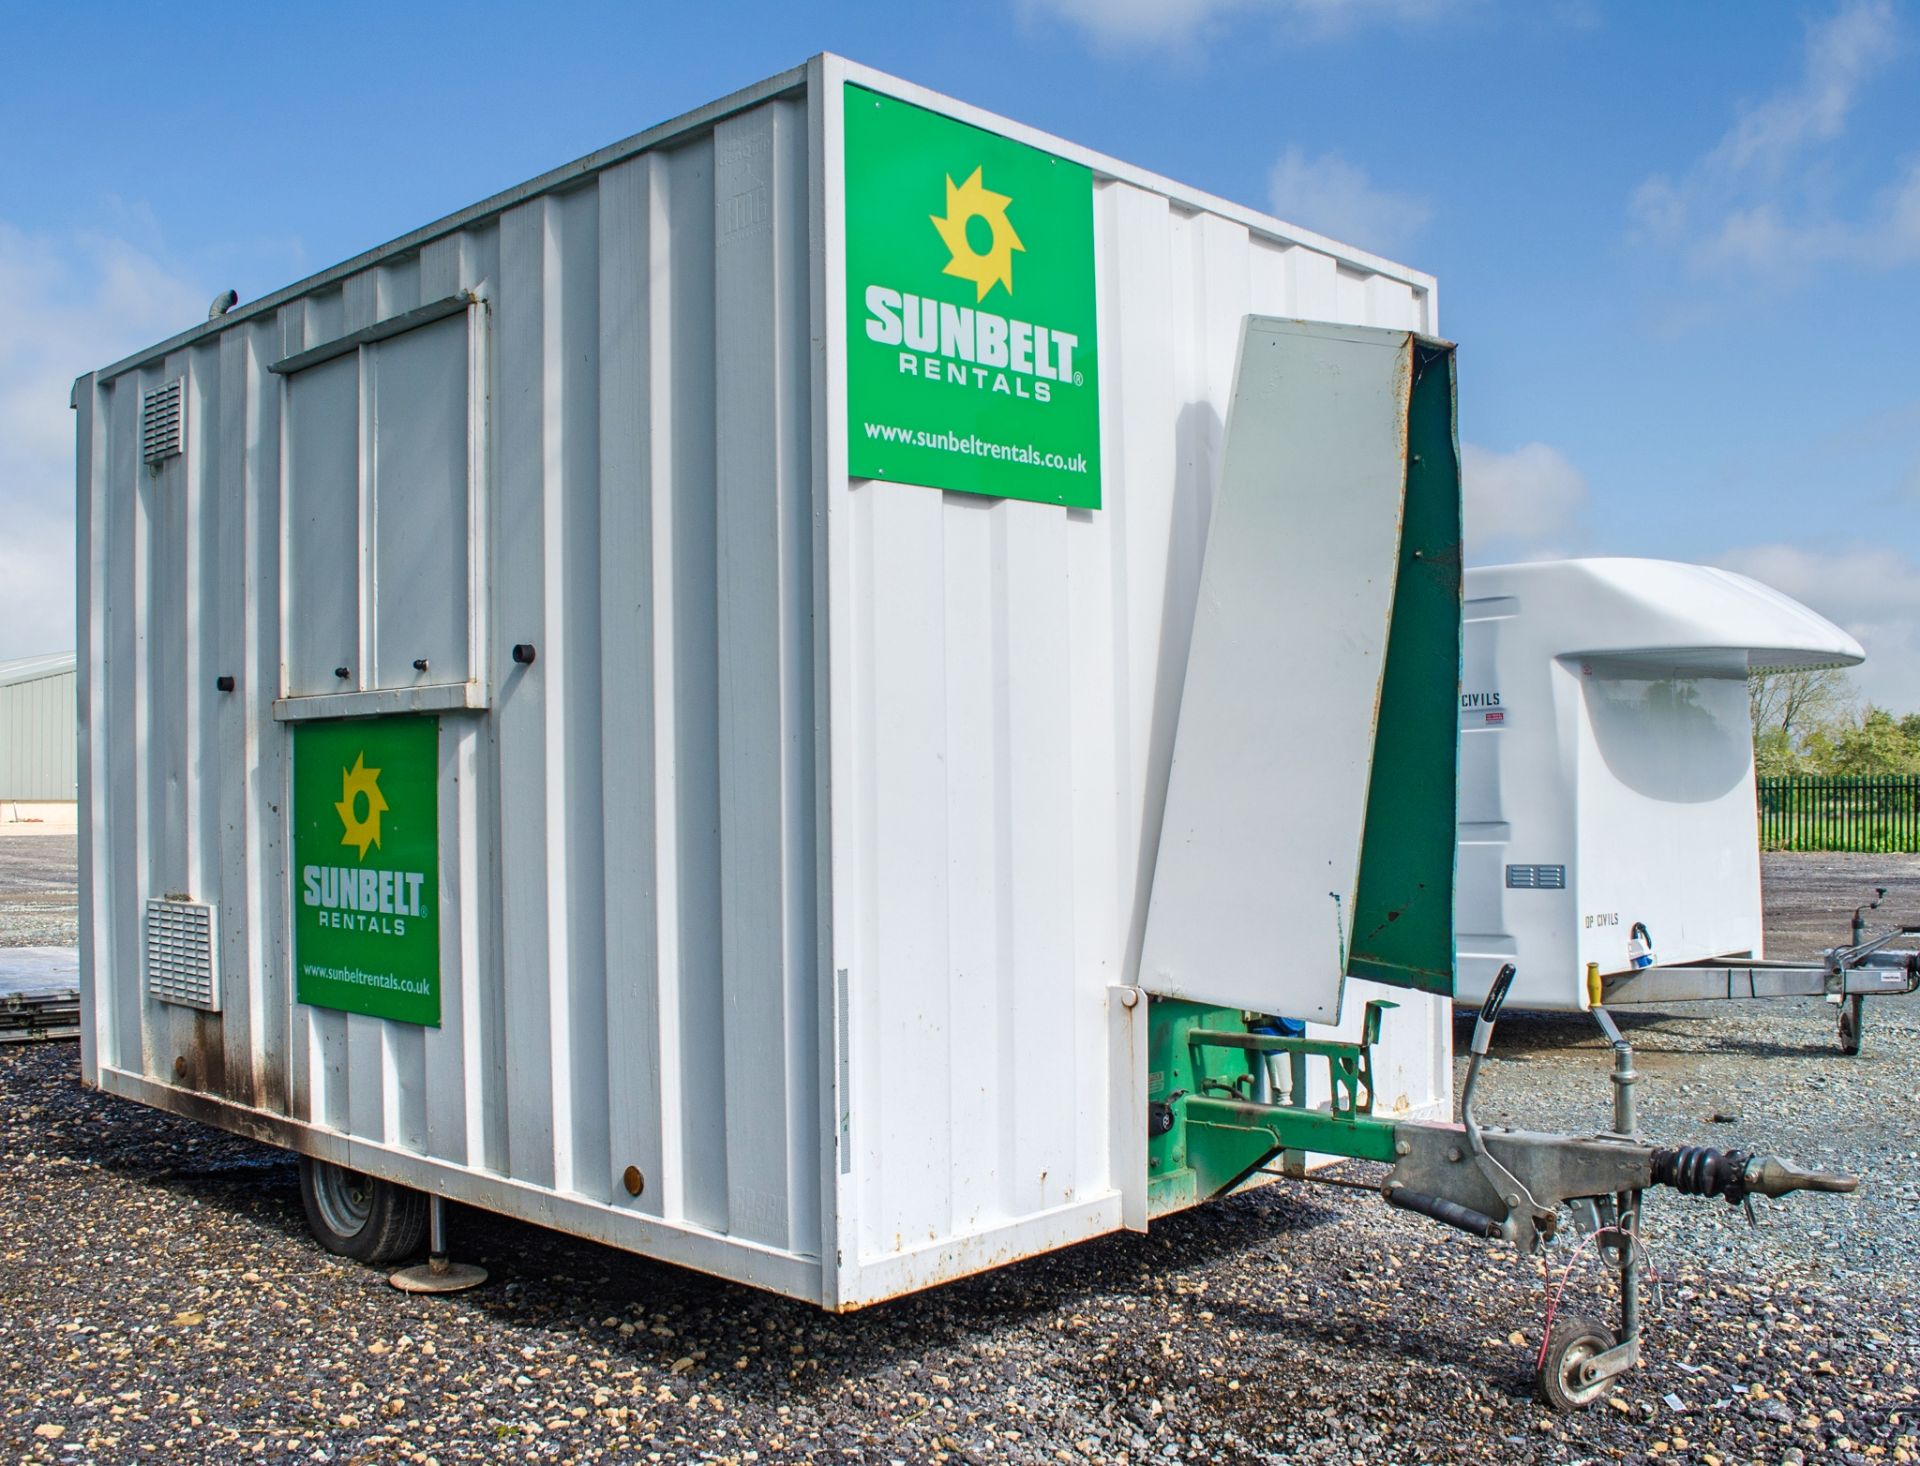 Groundhog 12 ft x 8 ft mobile welfare unit Comprising of: canteen area, toilet & generator room - Image 2 of 12